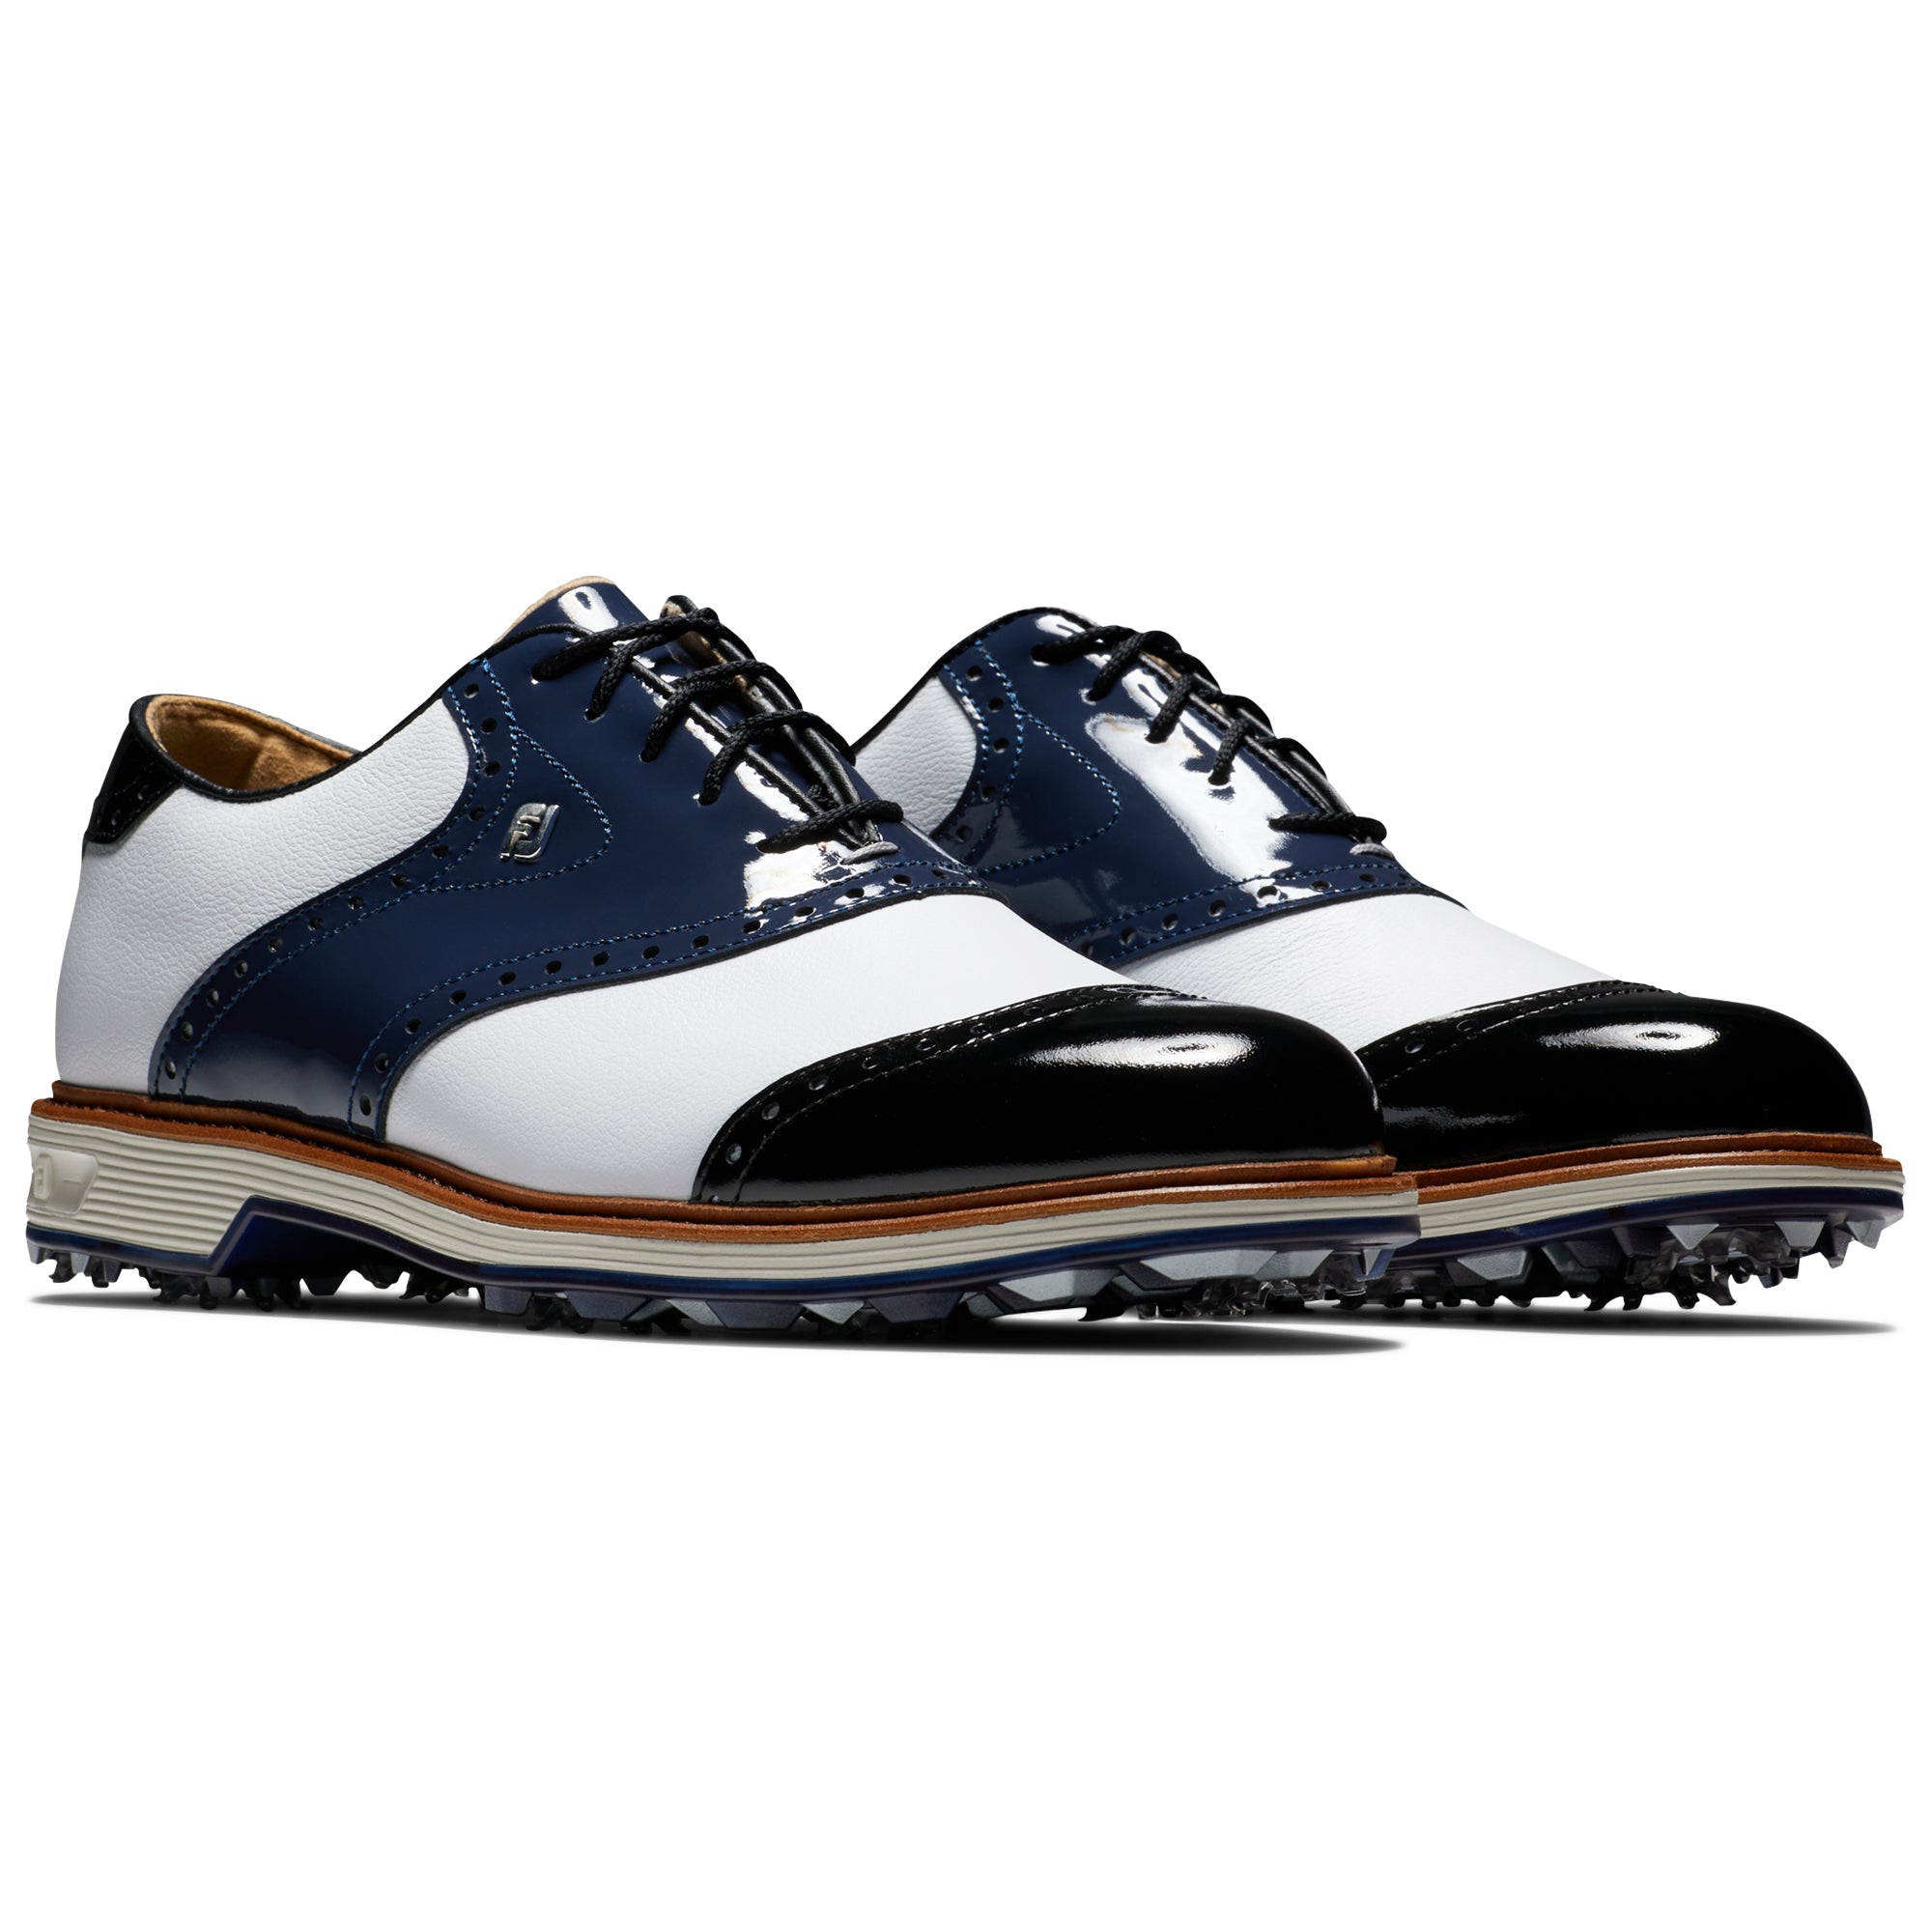 footjoy-premiere-series-wilcox-golf-shoes-54323-white-navy